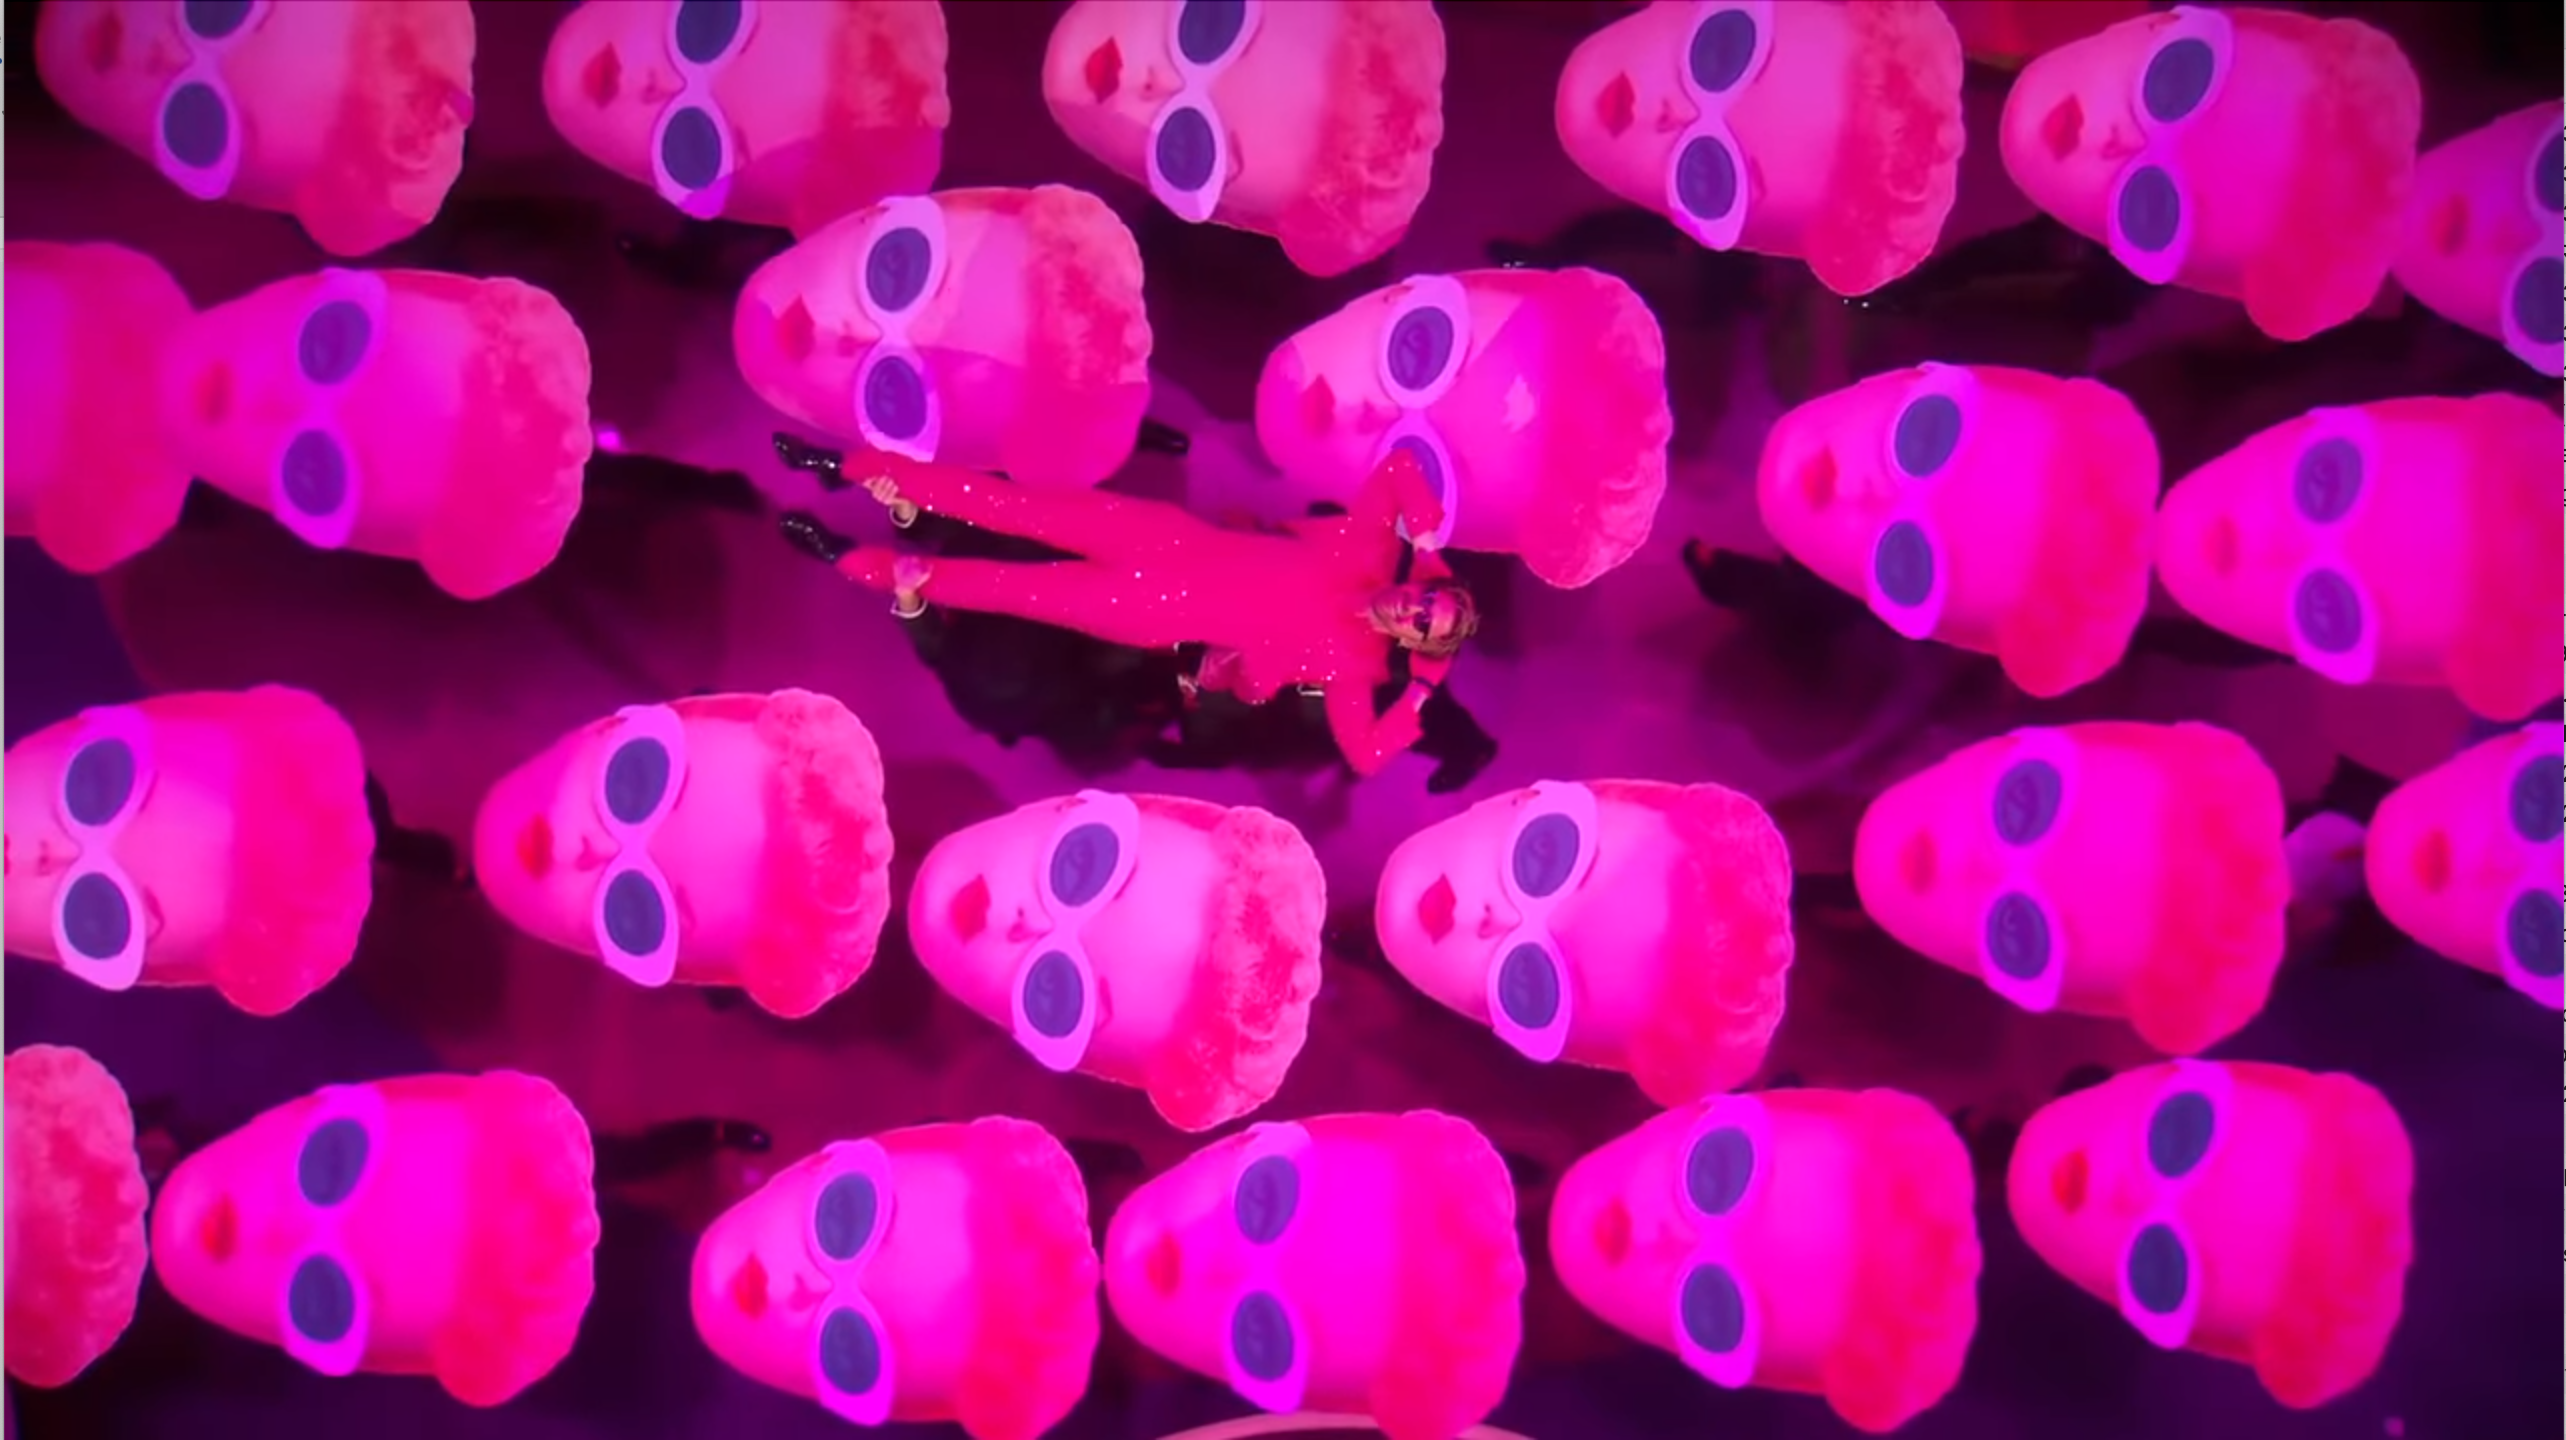 Ken swimming in a sea of Barbies during the Academy Awards performance